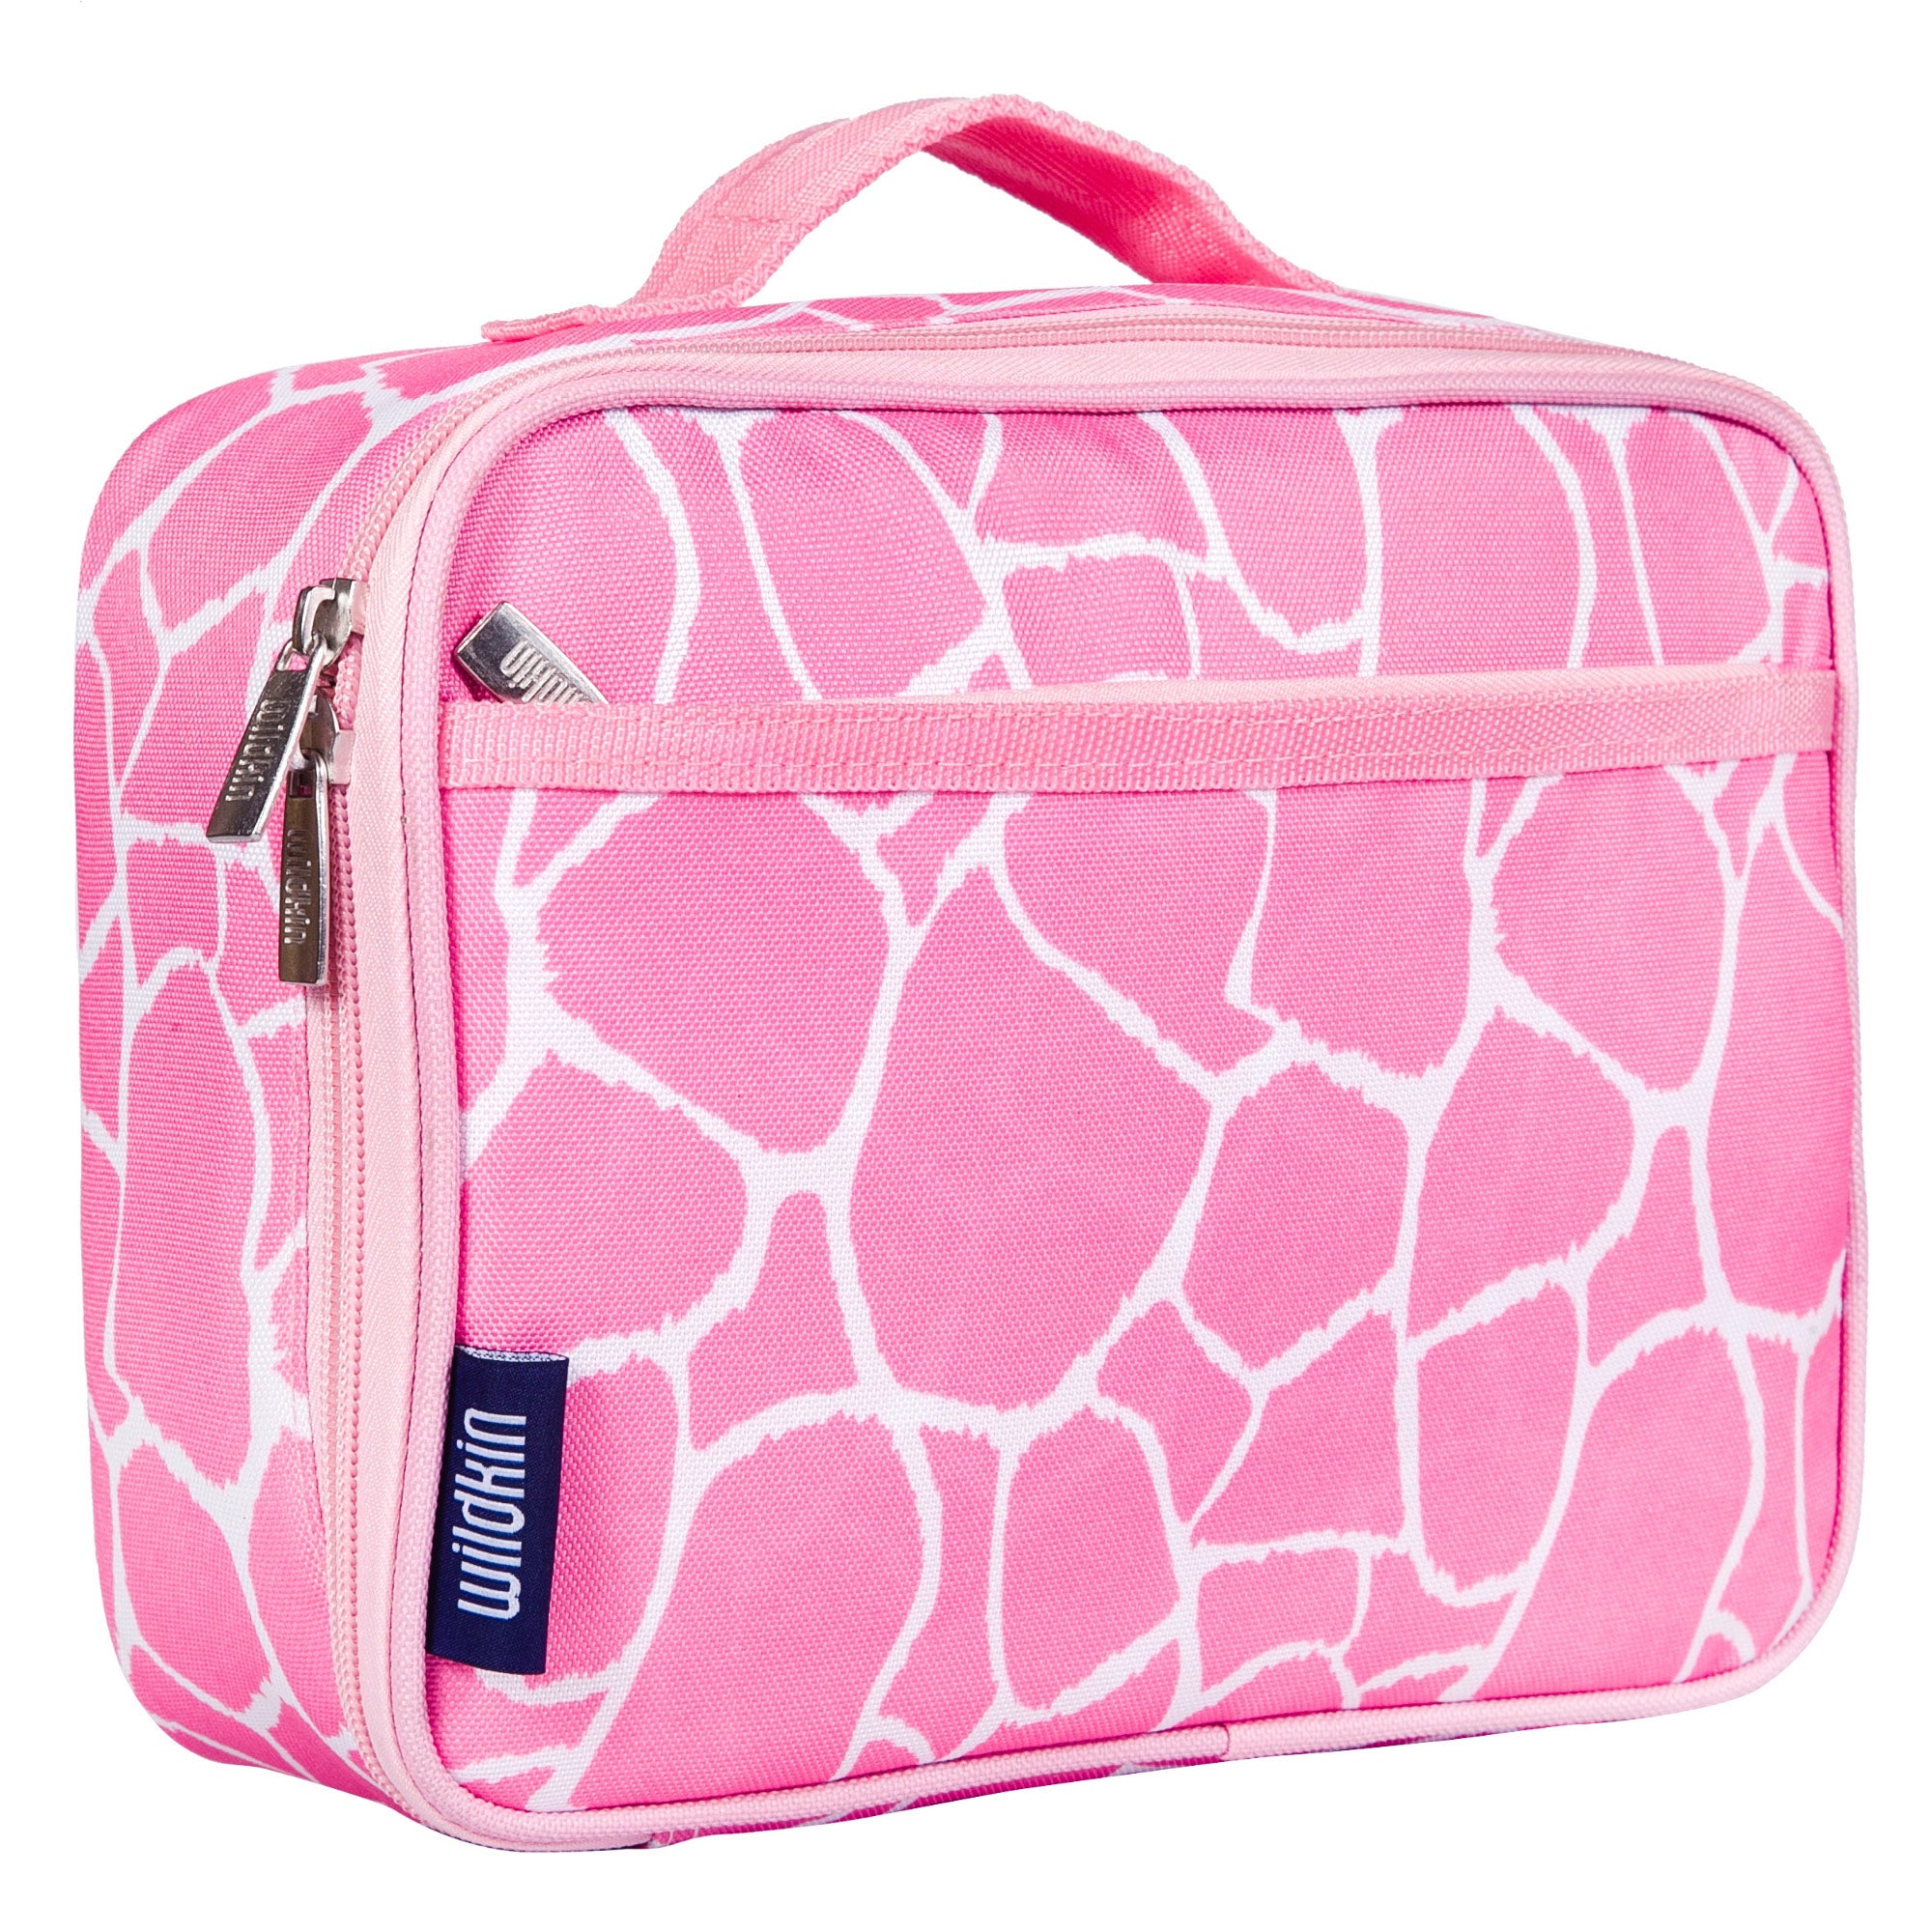 Hot Pink Lunch Box